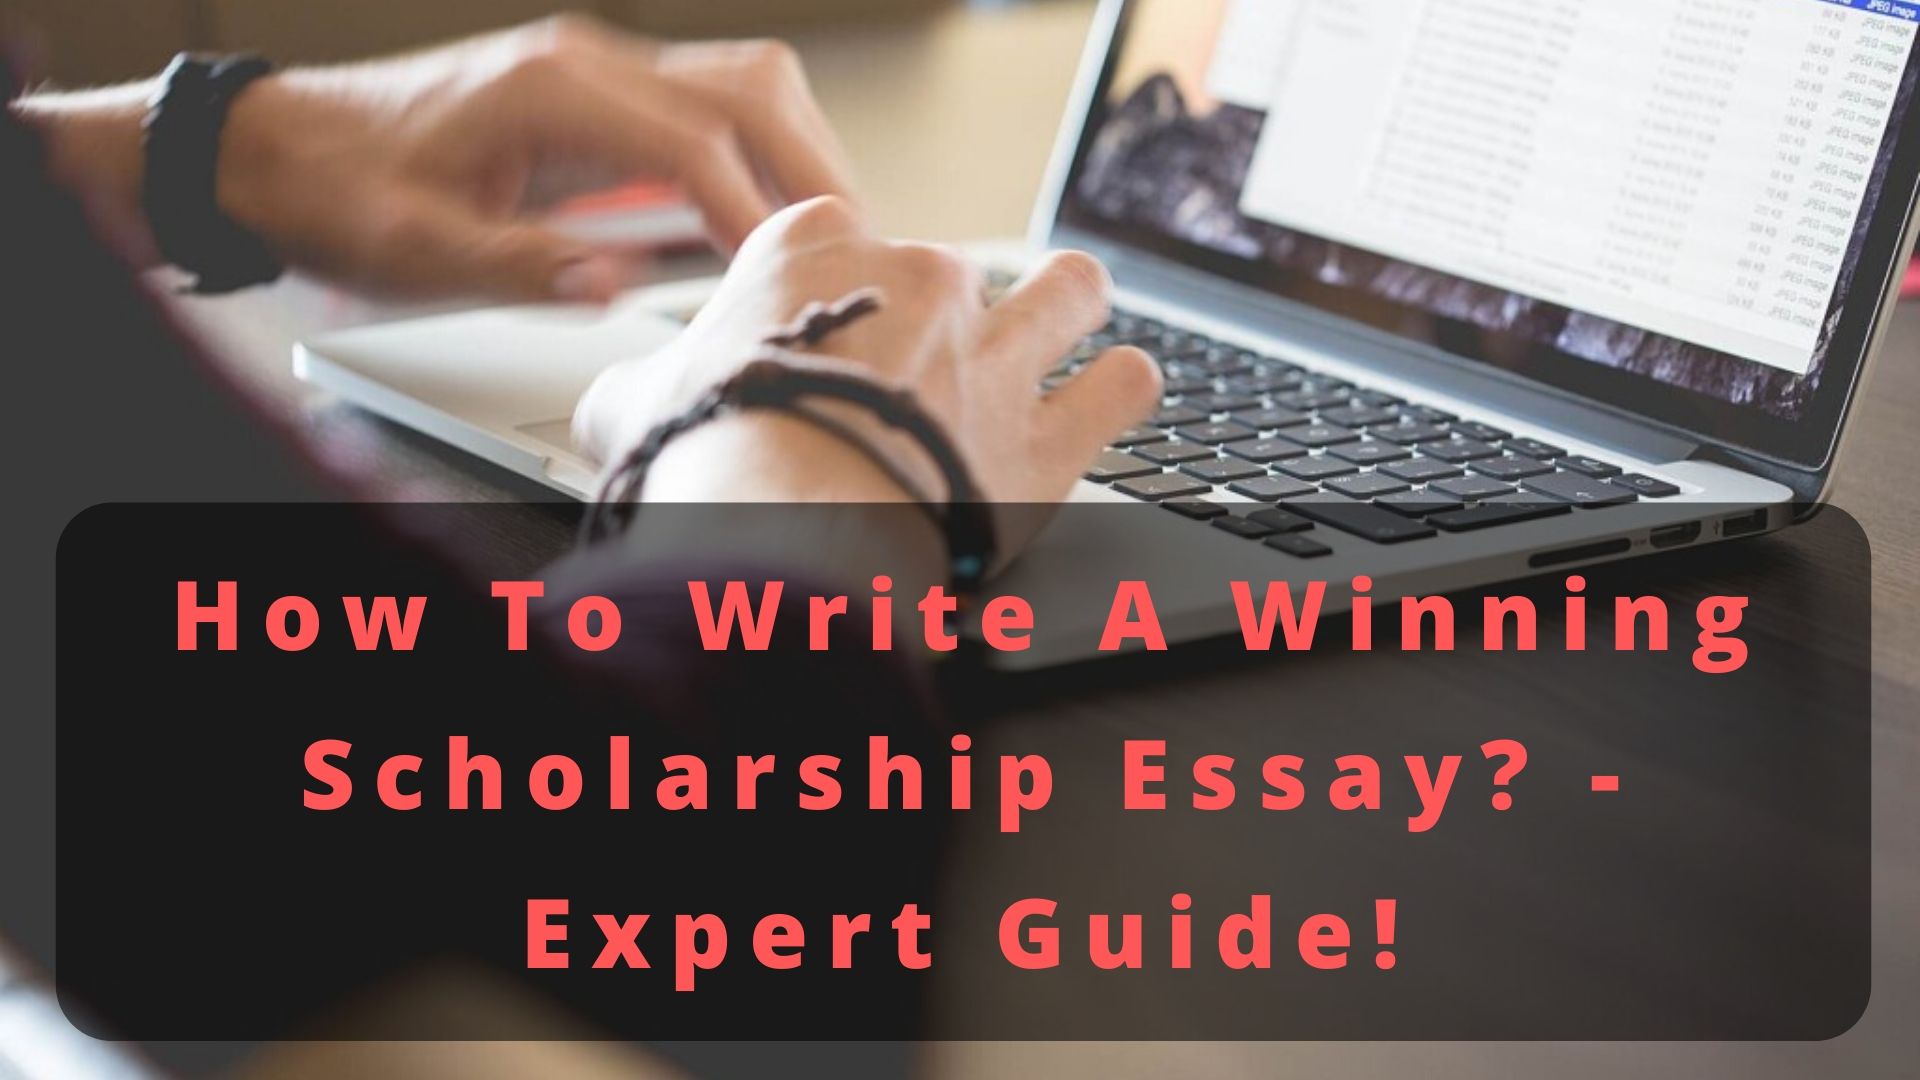 How To Write A Winning Scholarship Essay?